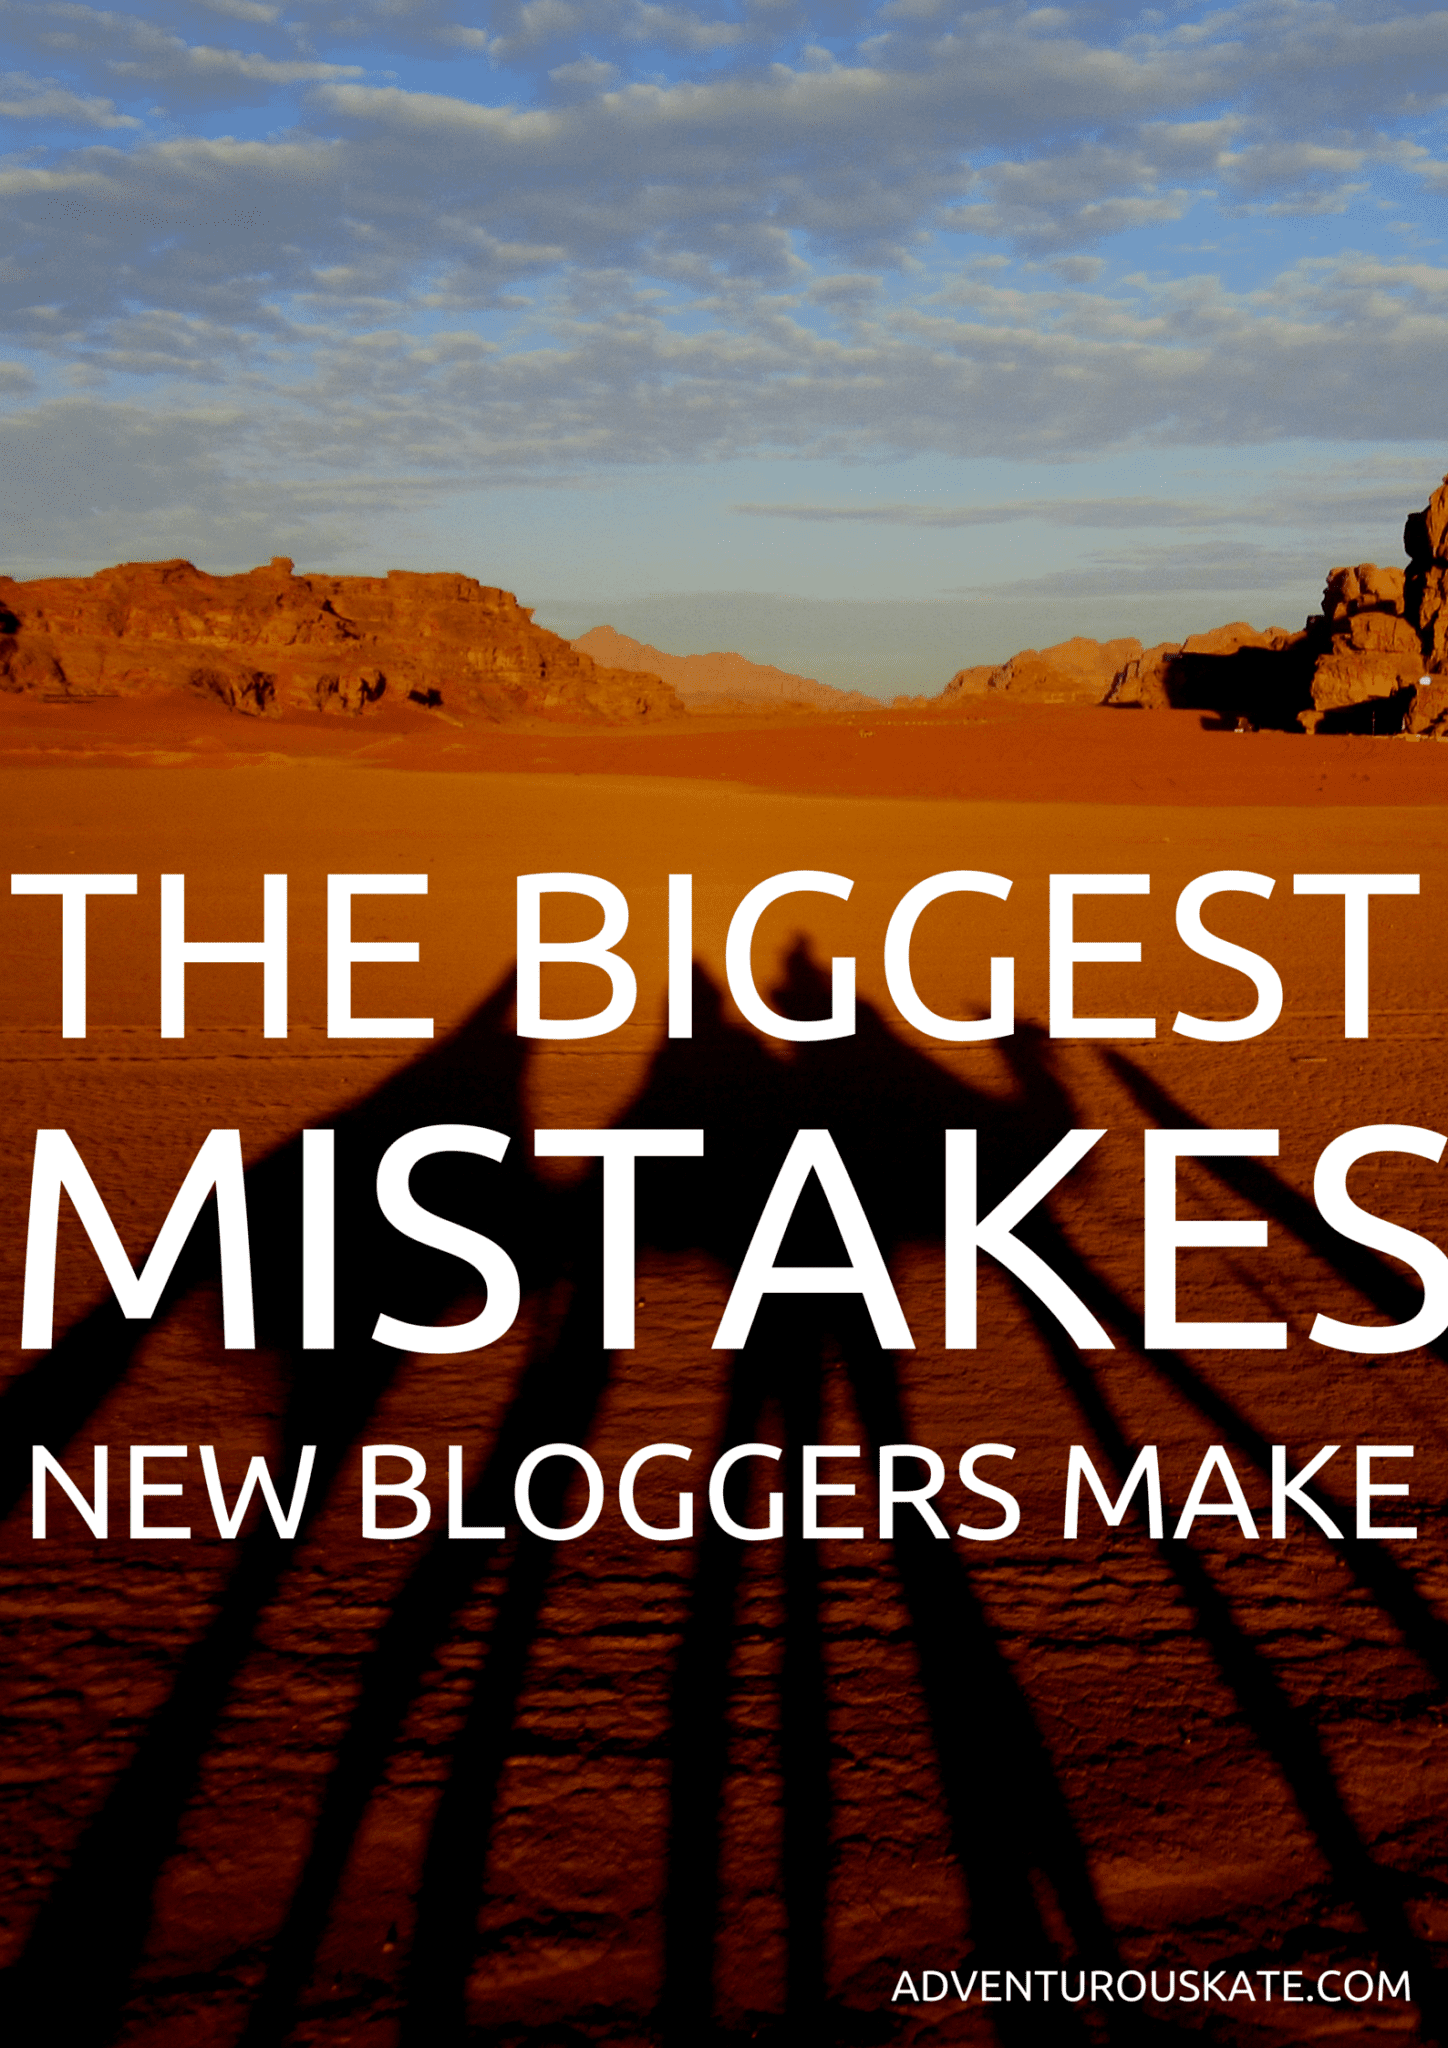 THE BIGGEST MISTAKES